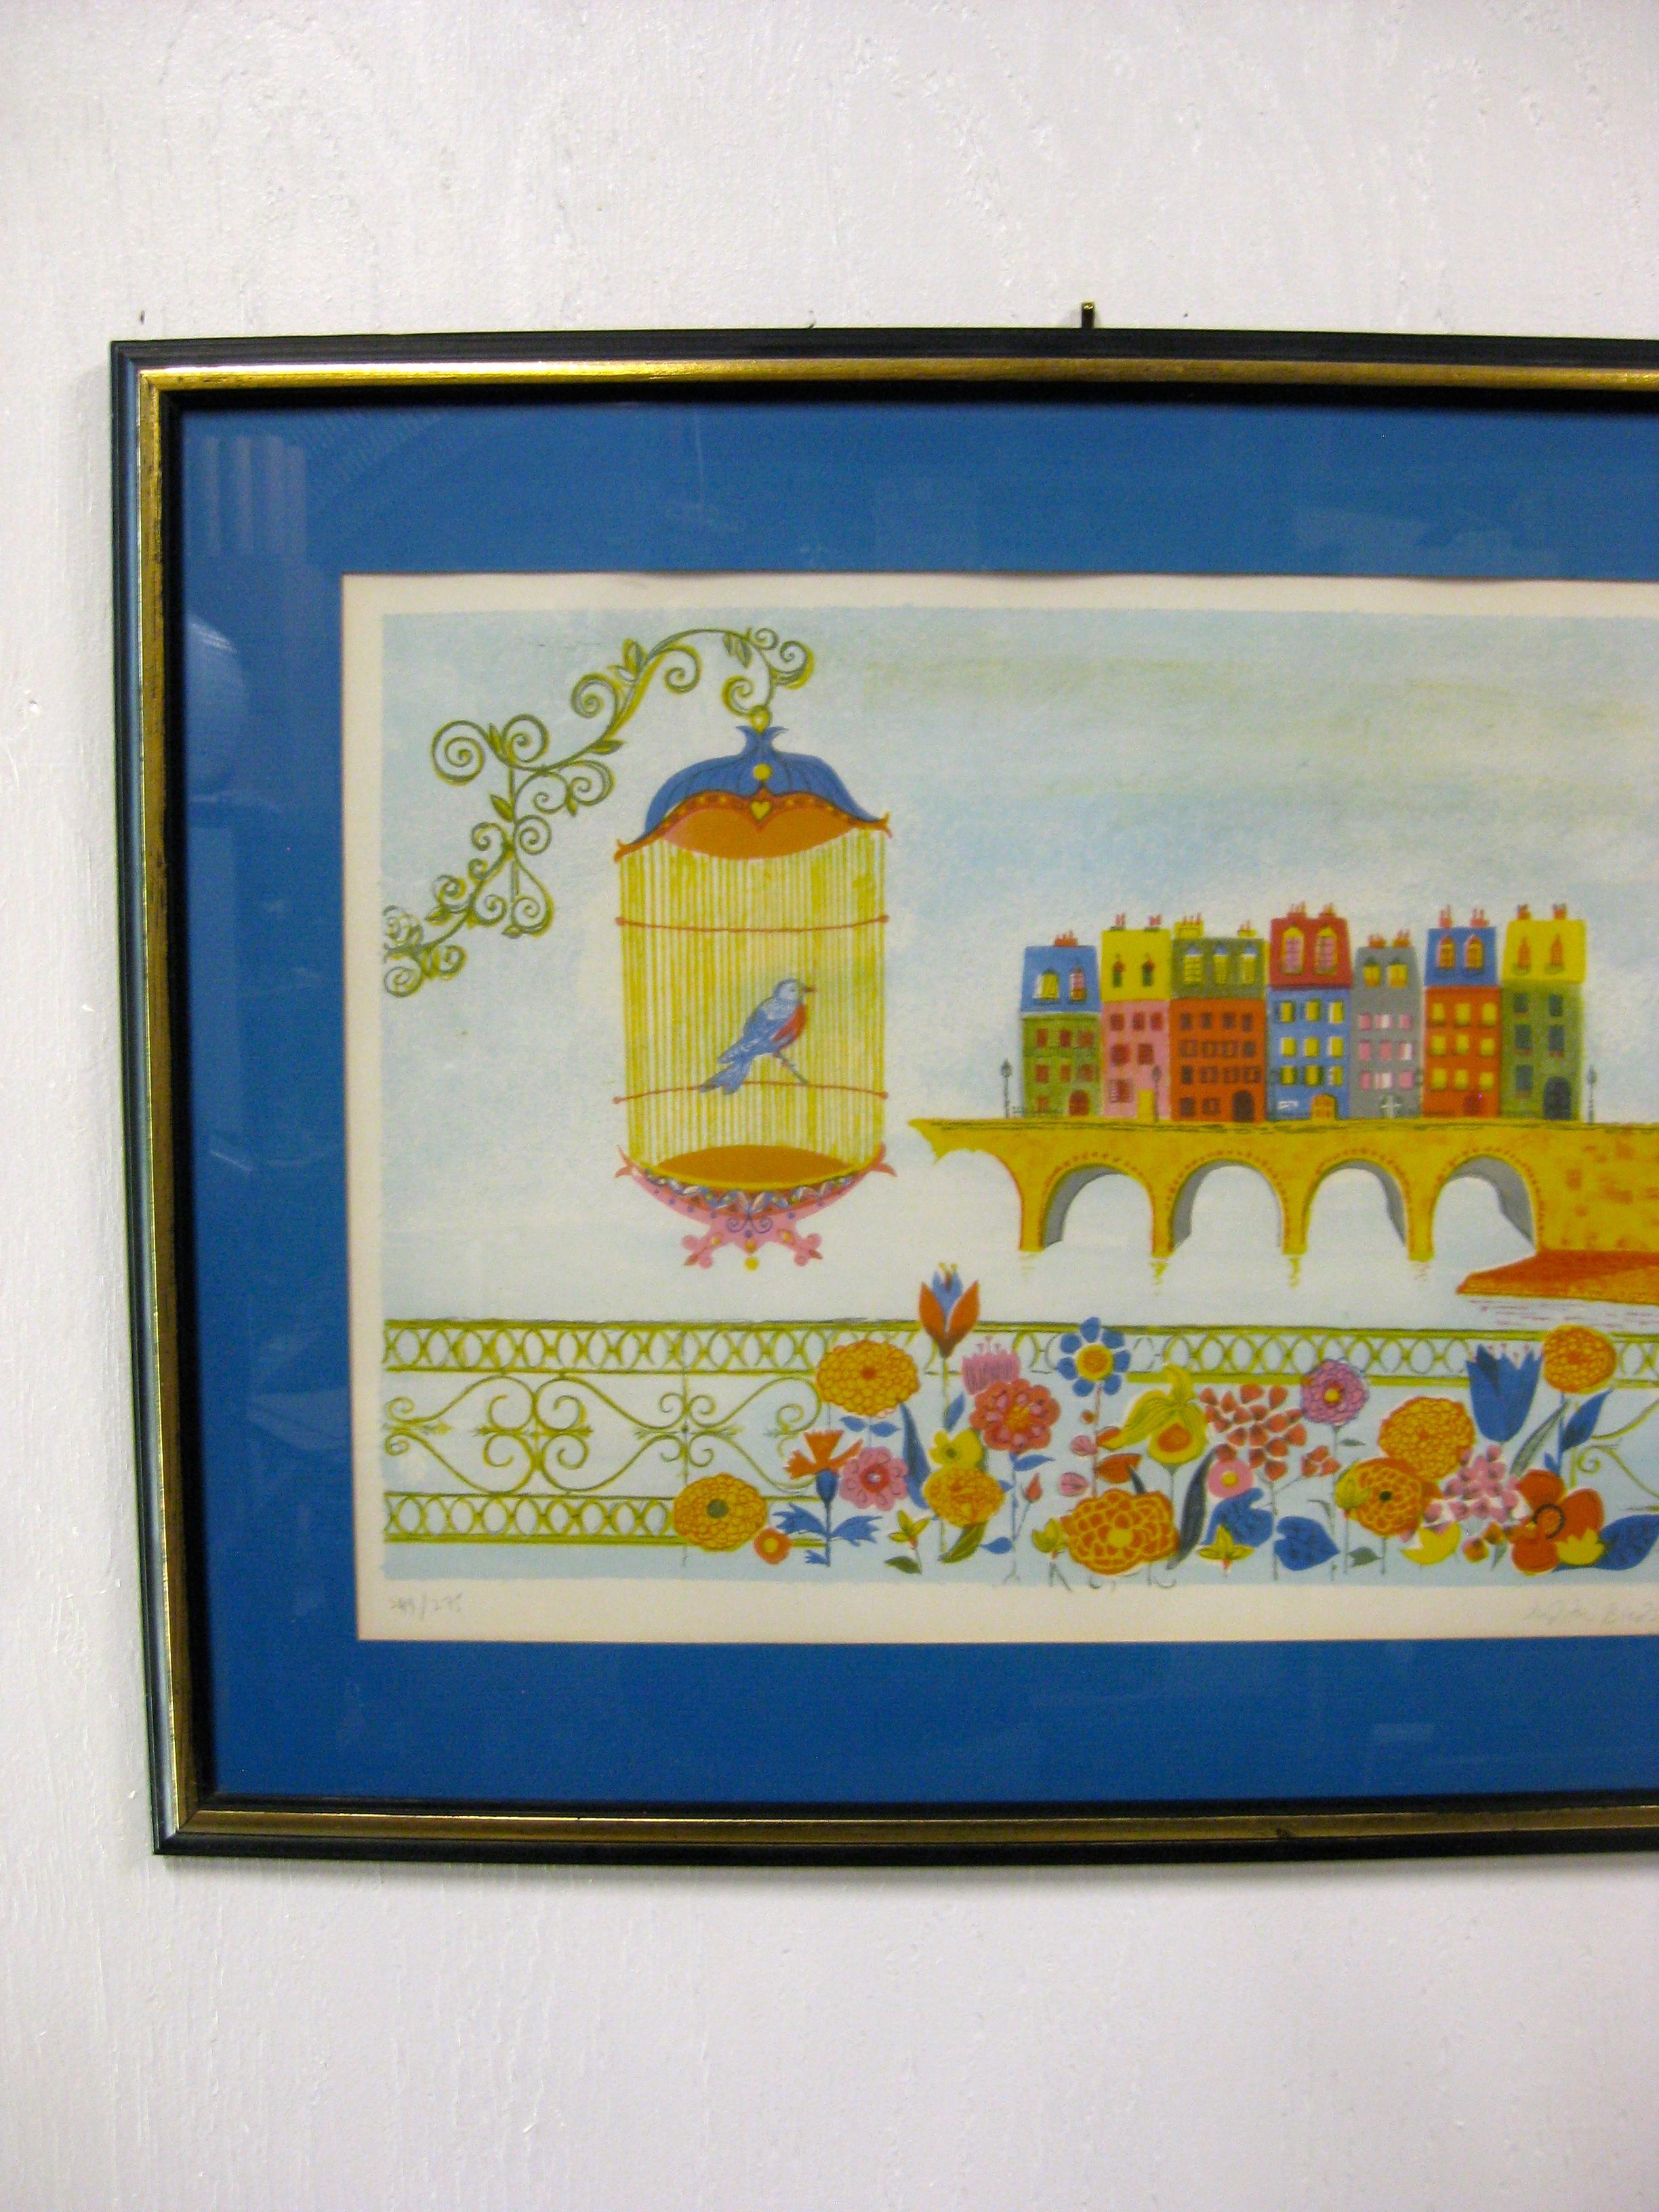 Wonderful hand signed and numbered whimsical lithograph by listed artist Judith Bledsoe, circa 1970's. The lithograph features a colorful cityscape and bird in a bird cage on a balcony. Vibrant colors. The art was sold through The Collector’s Guild